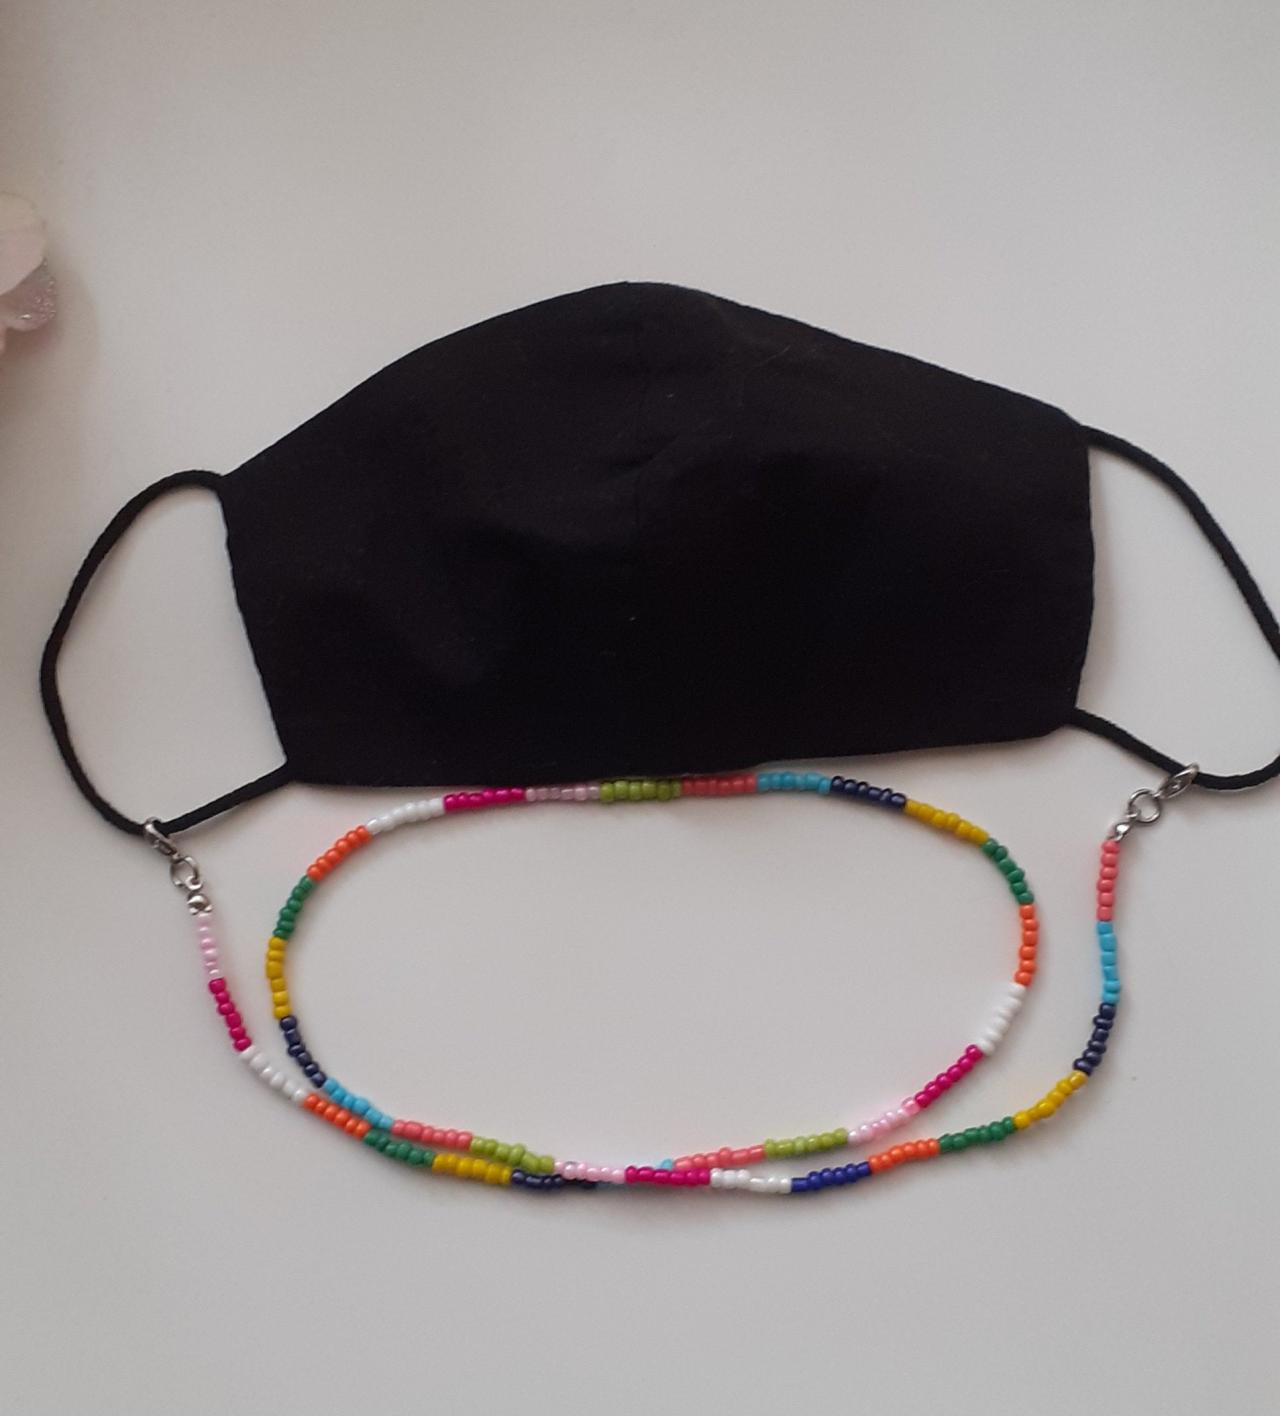 Rainbow Colored Chain, Chain For Mask, Chain For Glasses, Can Also Be Used As A Necklace And Bracelet